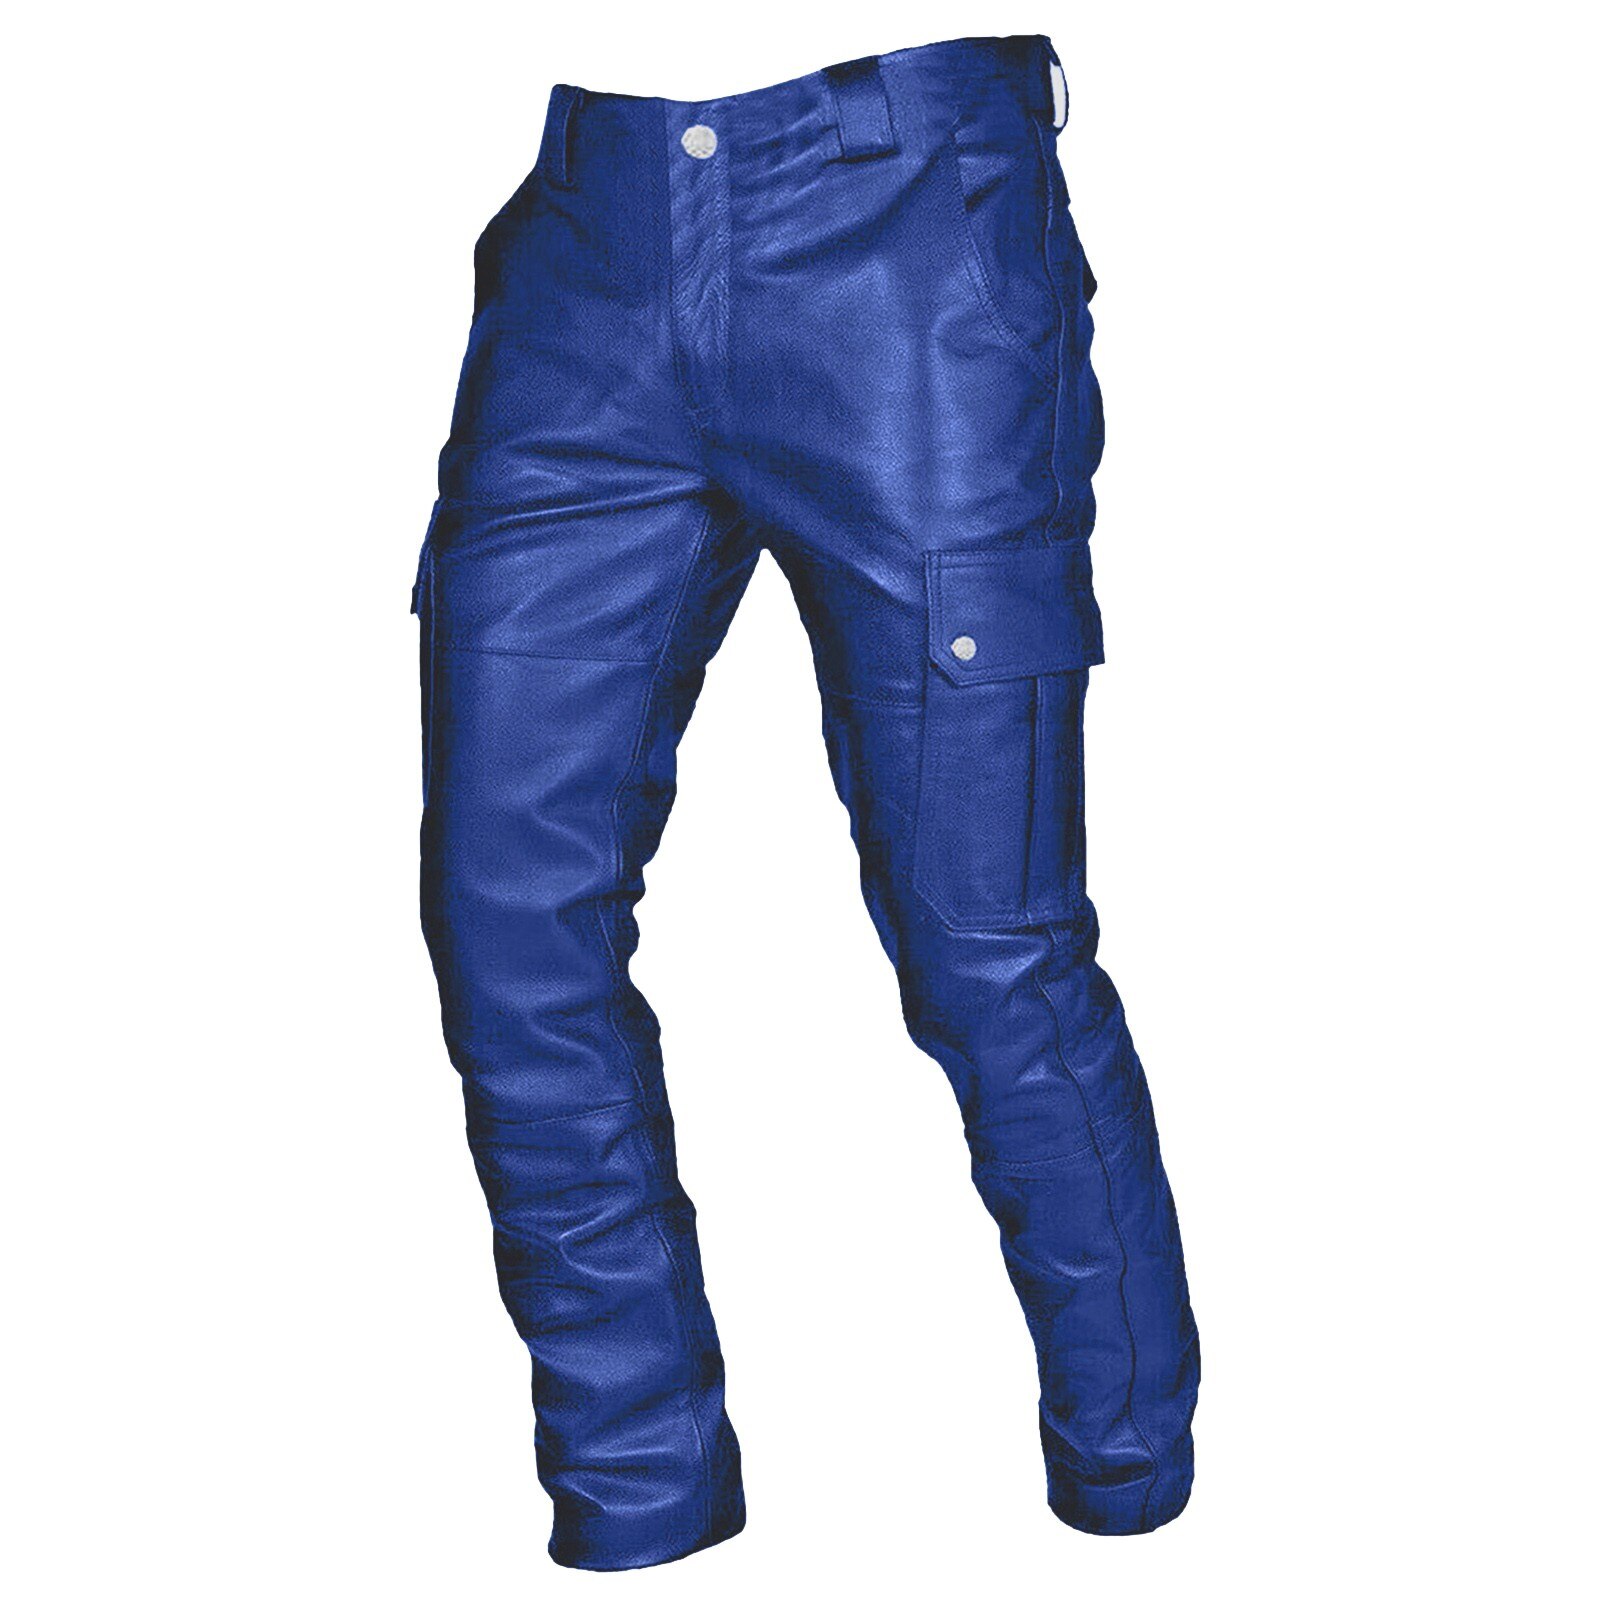 Winter Spring Mens Skinny Biker Leather Pants Fashion Faux Leather Motorcycle Trousers For Male Trouser Stage Club Wear L5